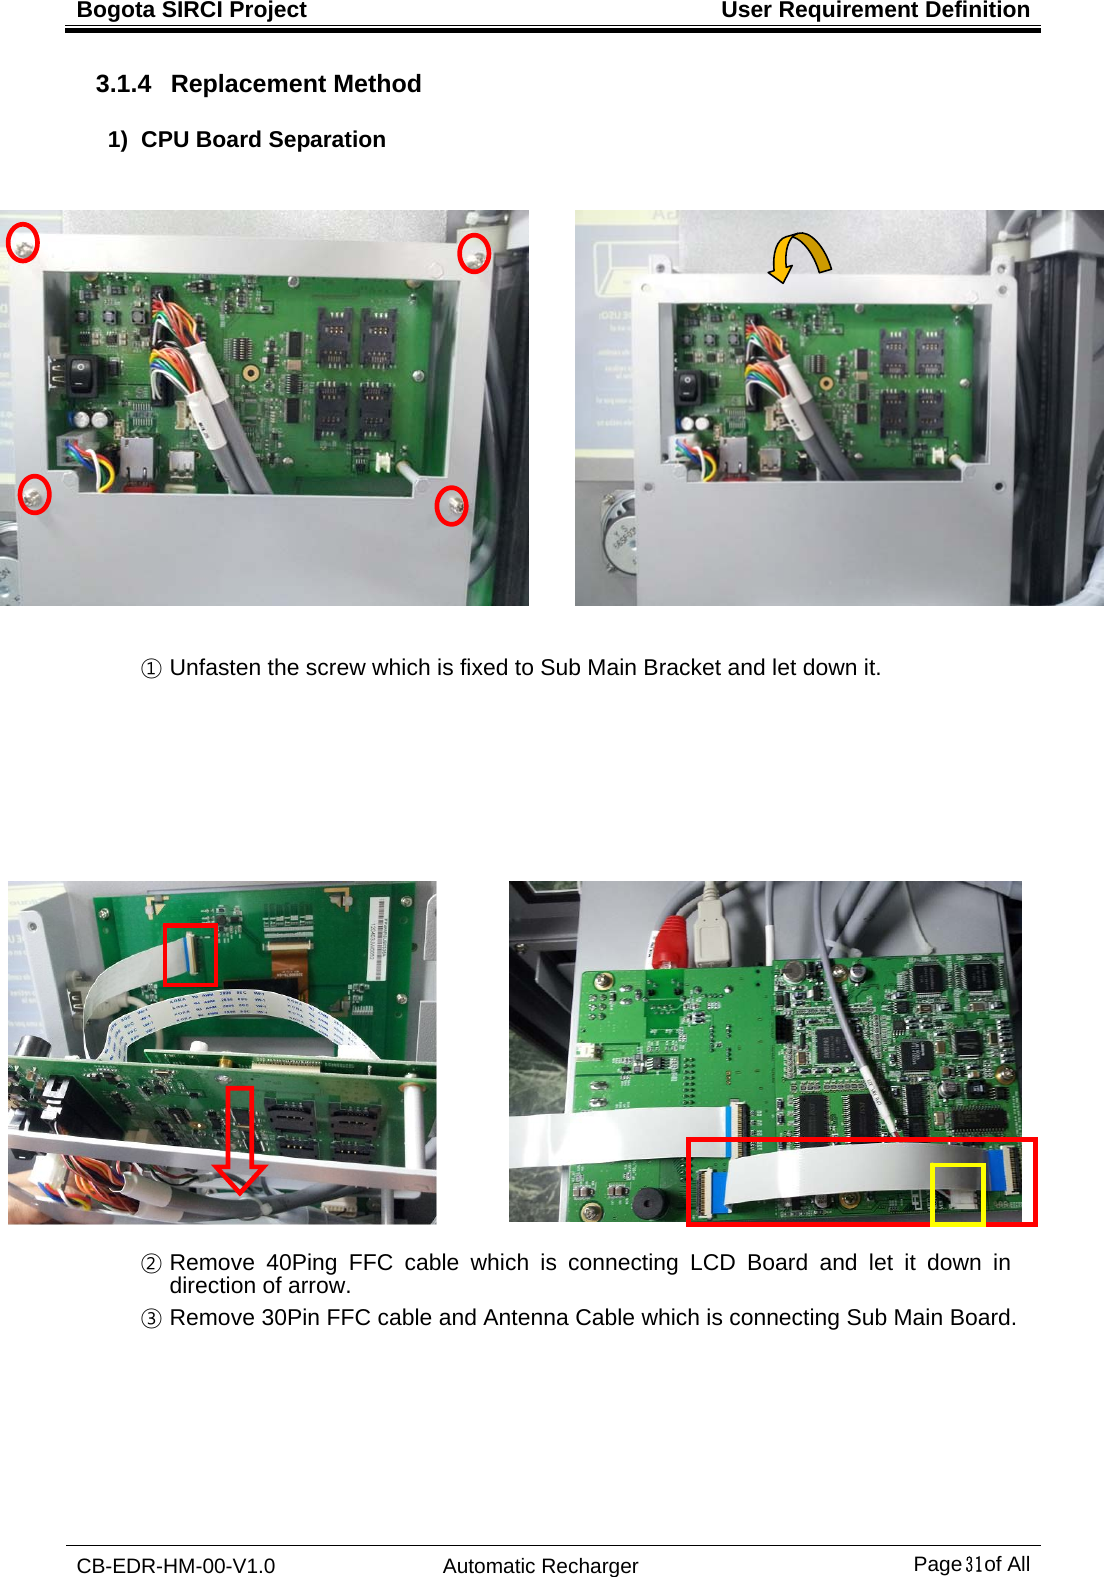 Bogota SIRCI Project  User Requirement Definition CB-EDR-HM-00-V1.0 Automatic Recharger Page３１ of All 3.1.4  Replacement Method 1) CPU Board Separation    ① Unfasten the screw which is fixed to Sub Main Bracket and let down it.                       ② Remove 40Ping FFC cable which is connecting LCD Board and let it down in direction of arrow. ③ Remove 30Pin FFC cable and Antenna Cable which is connecting Sub Main Board.   